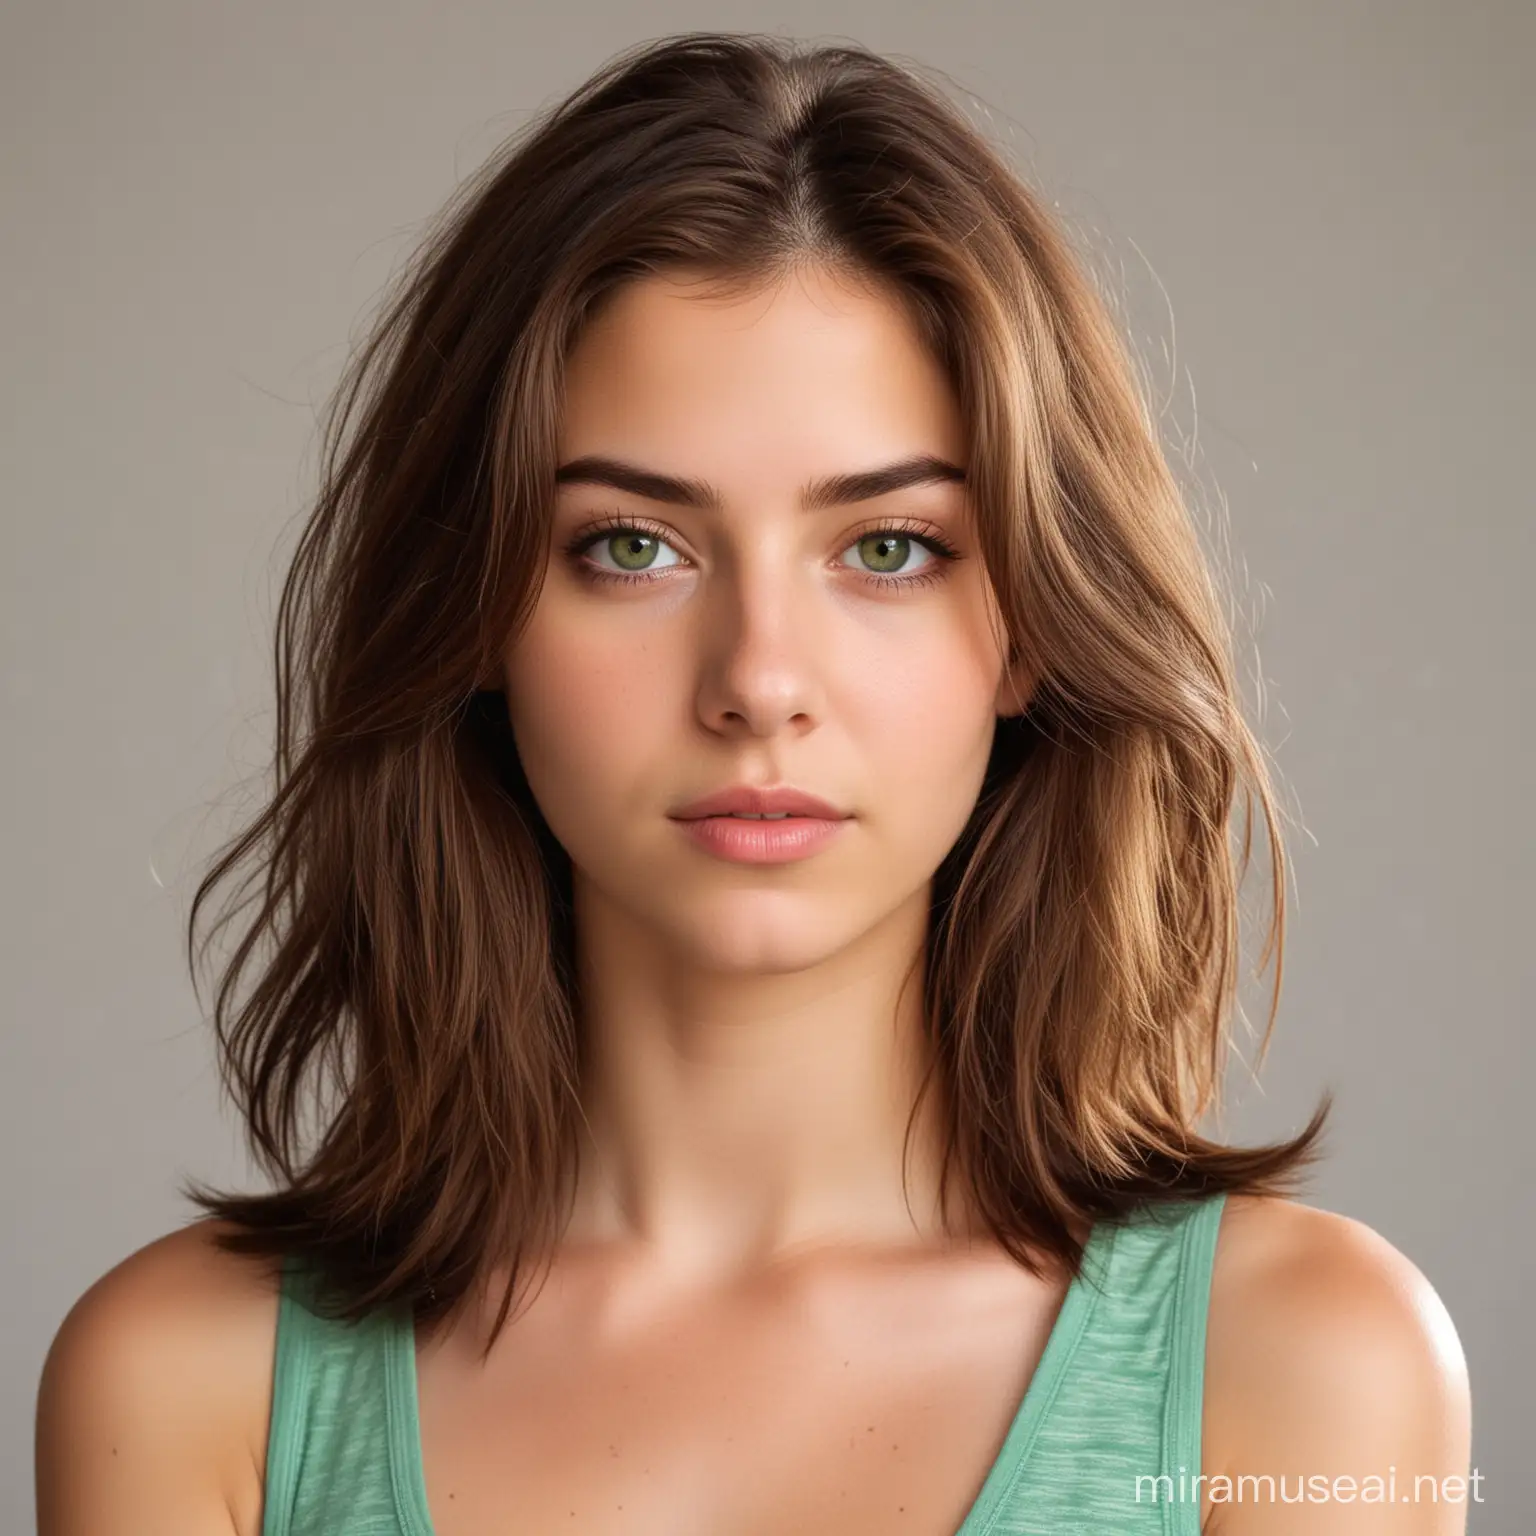 A pretty woman. She is 18 years old. She has shoulder-length brown hair. Her eyes are green. Her expression shows she is serious